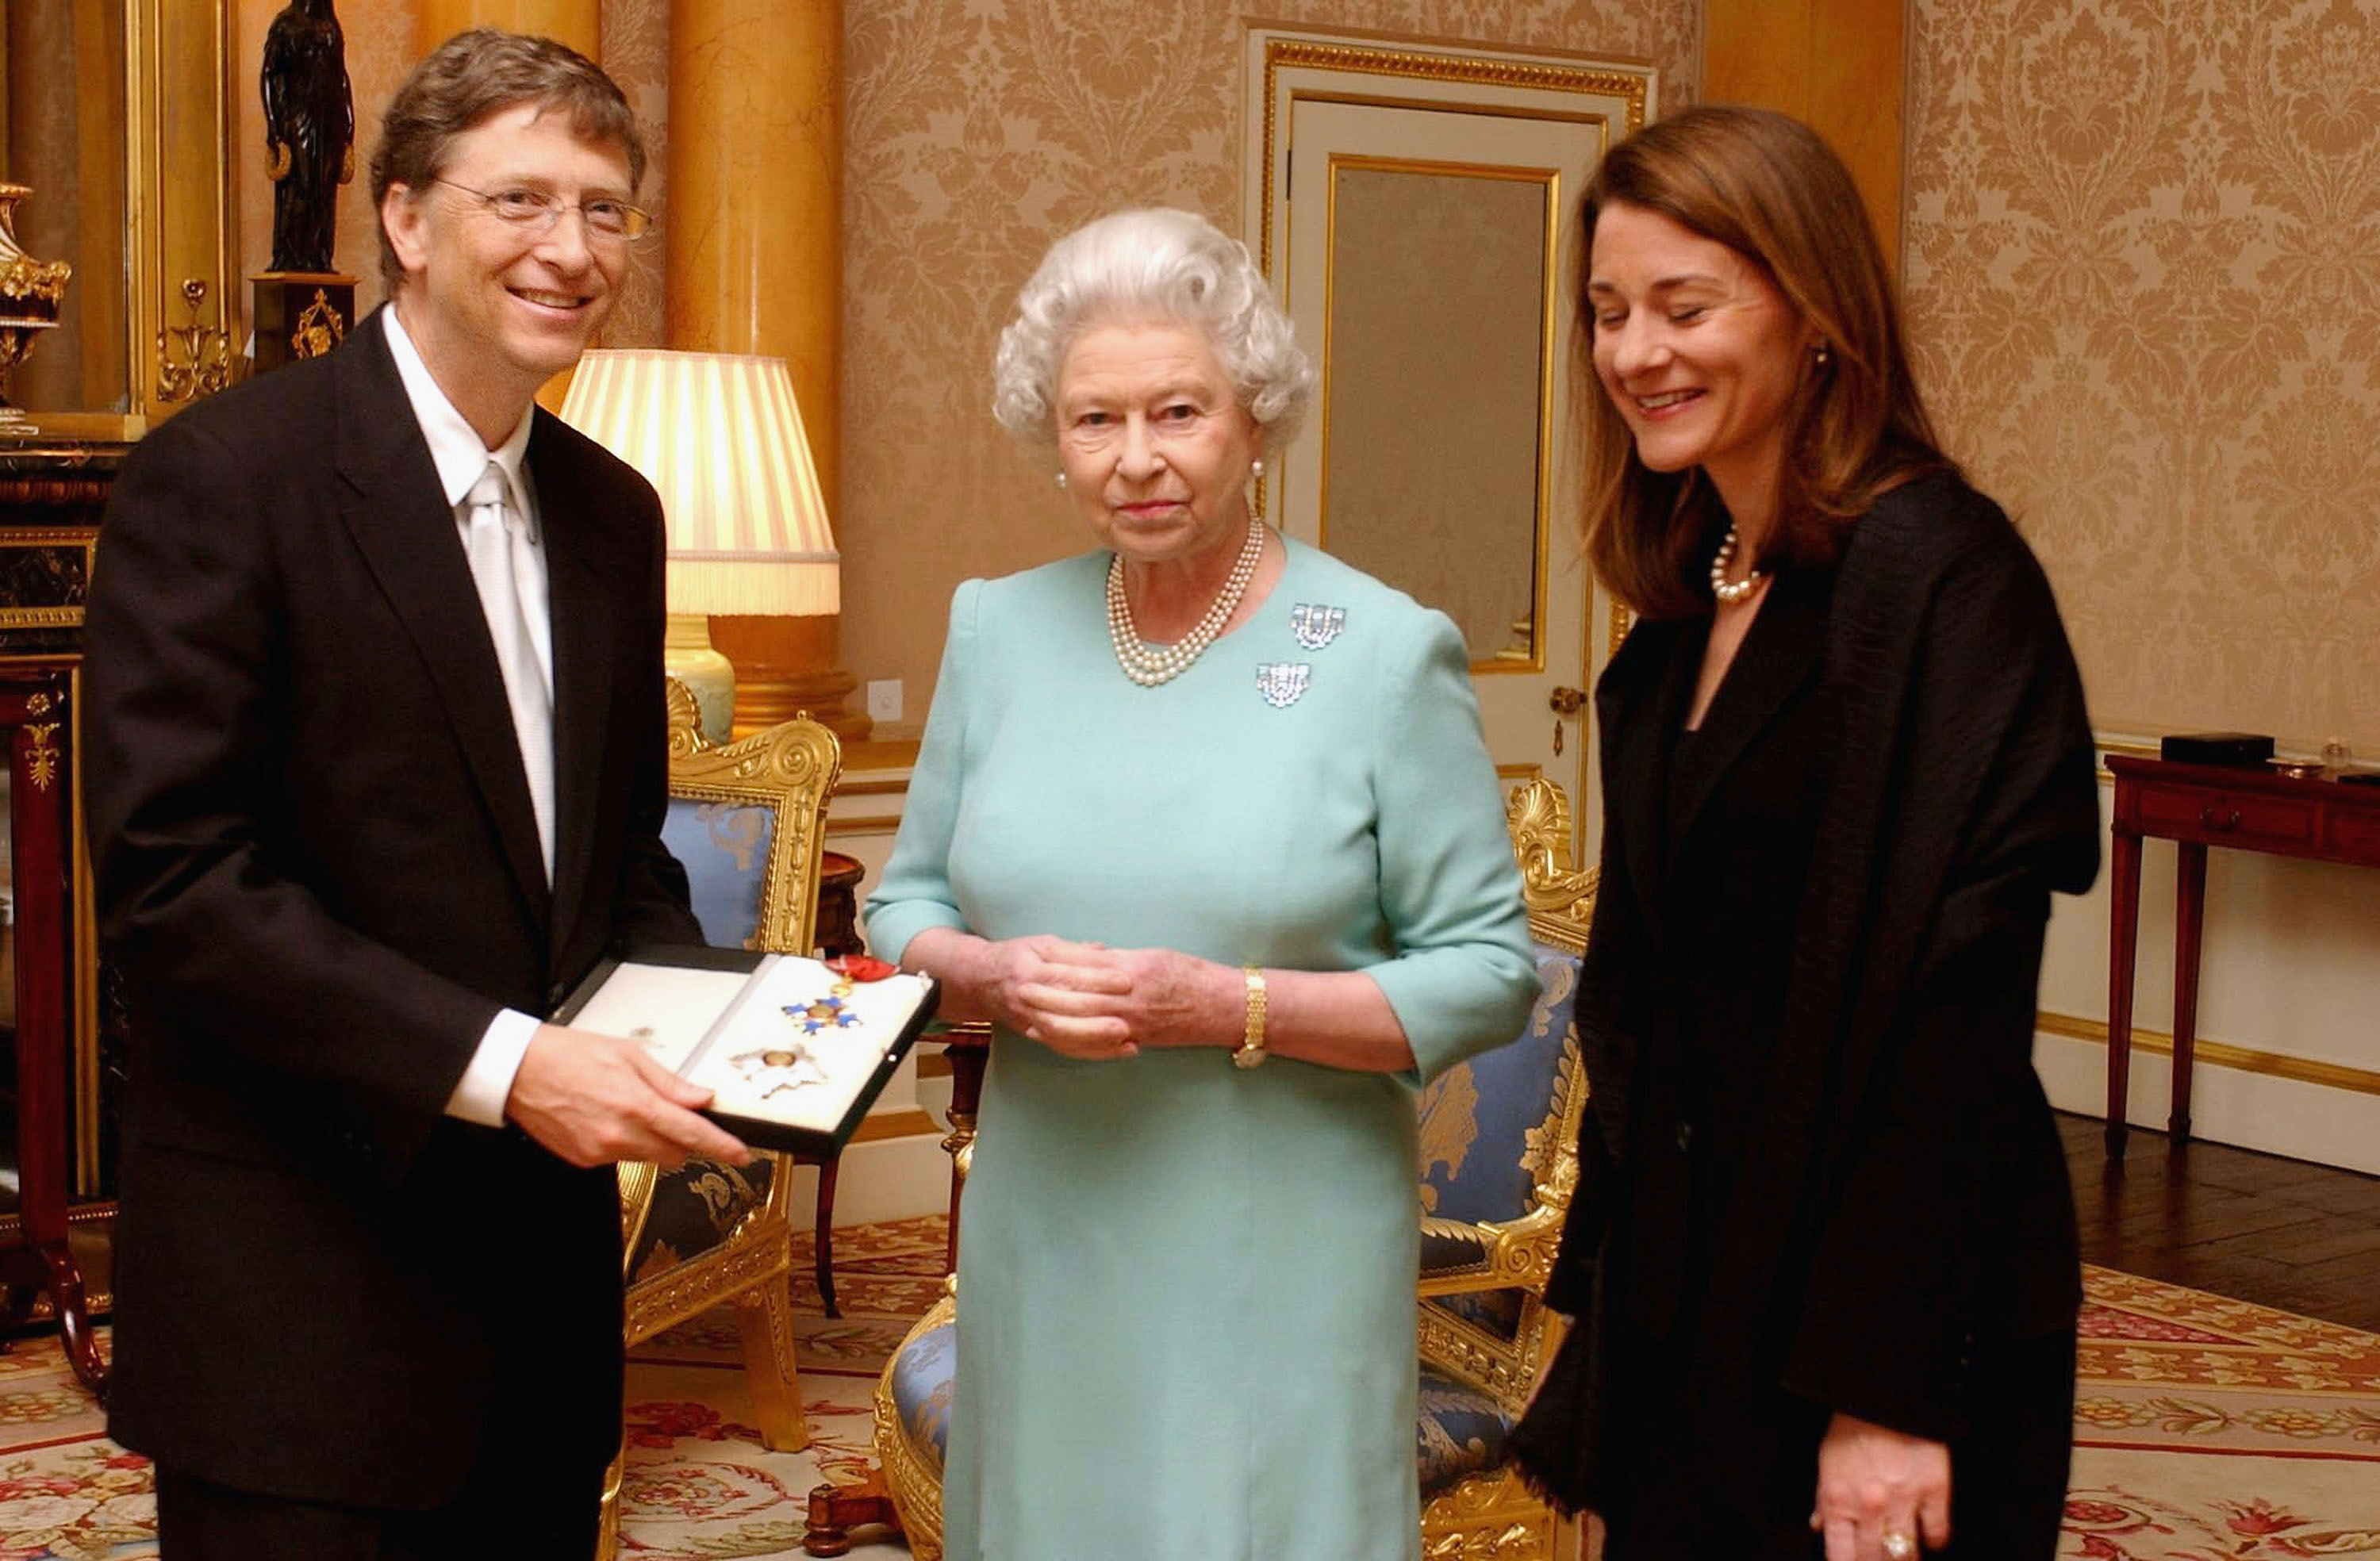 Queen Elizabeth II Granted 27 Americans Honorary Knighthoods in Her Reign